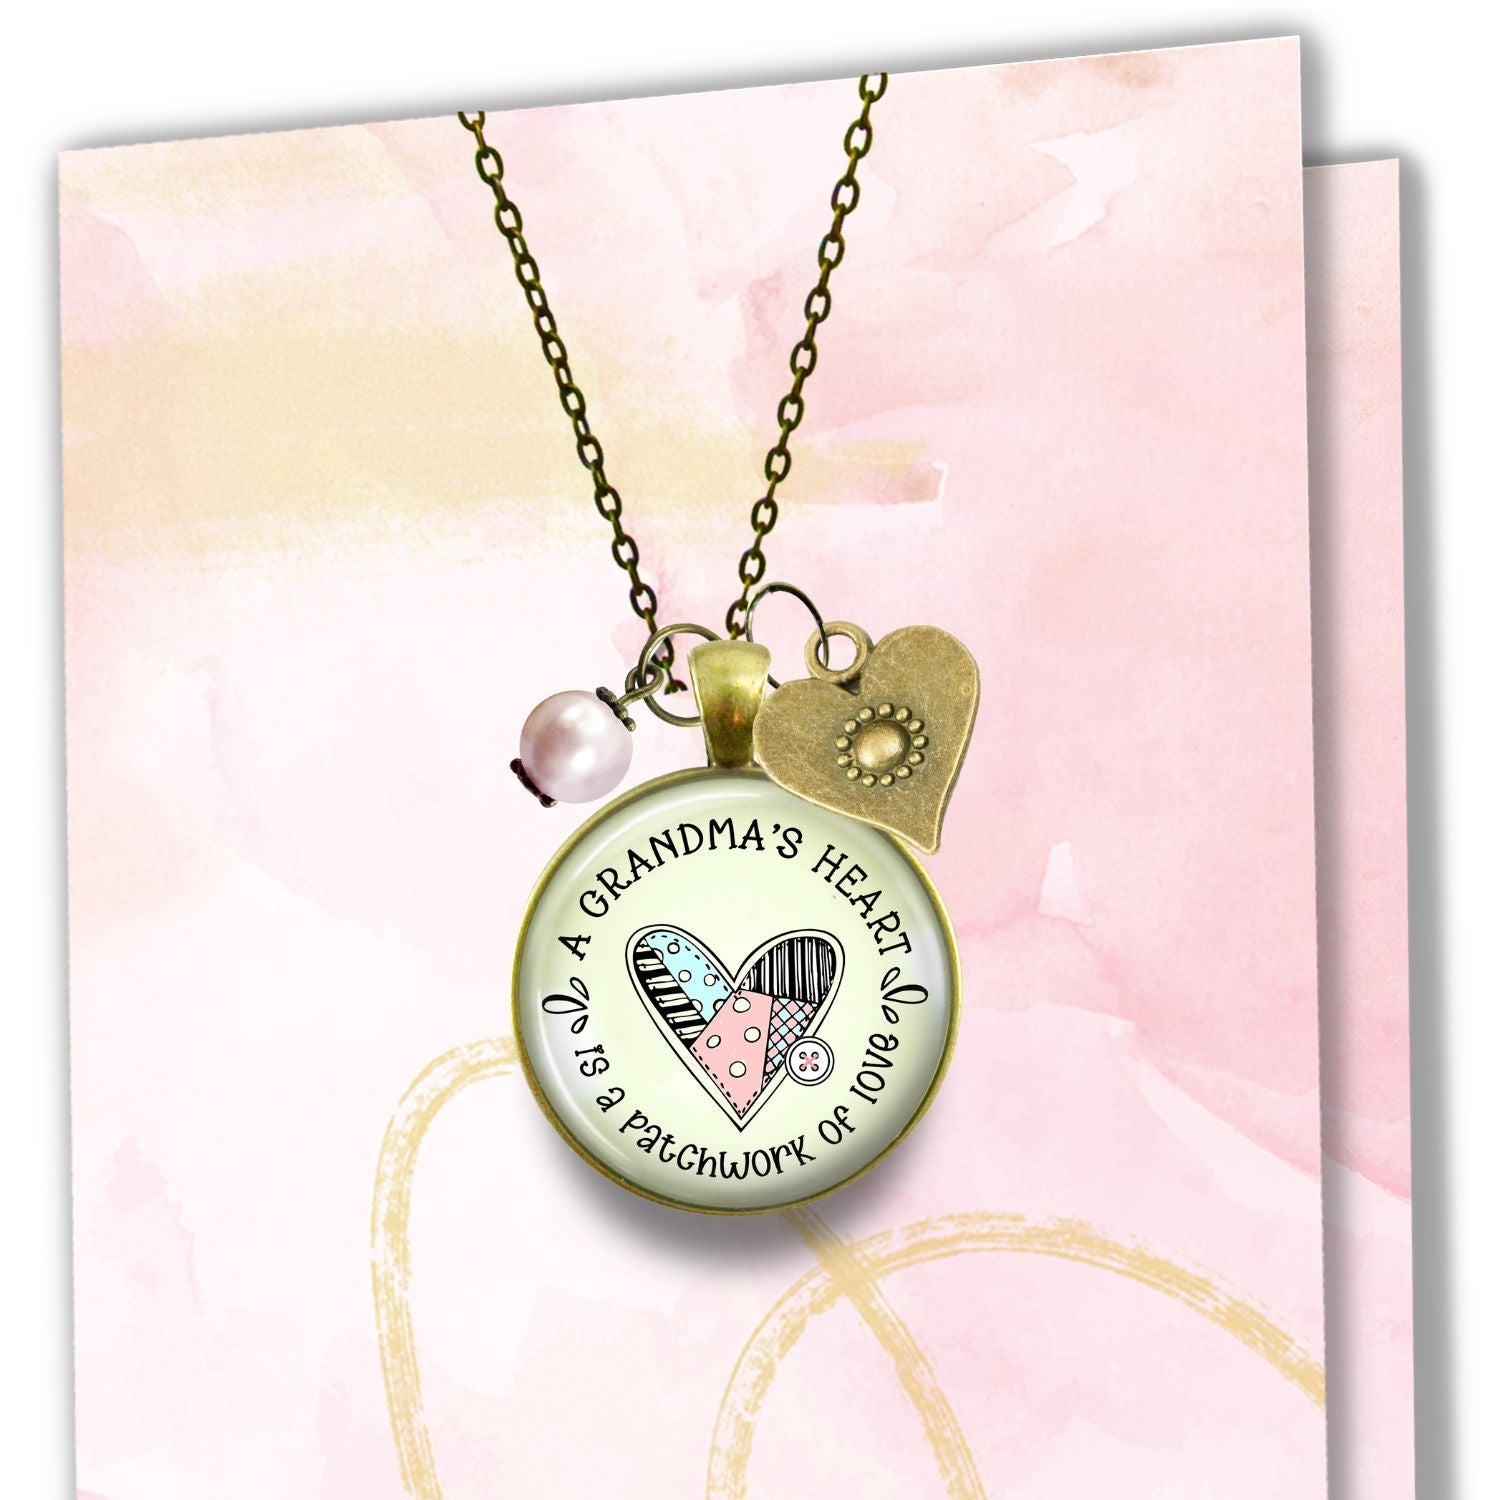 Handmade Gutsy Goodness Jewelry Grandmother Necklace Gift Grandma's Heart Is A Patchwork of Love Handmade Jewelry, Meaningful Card